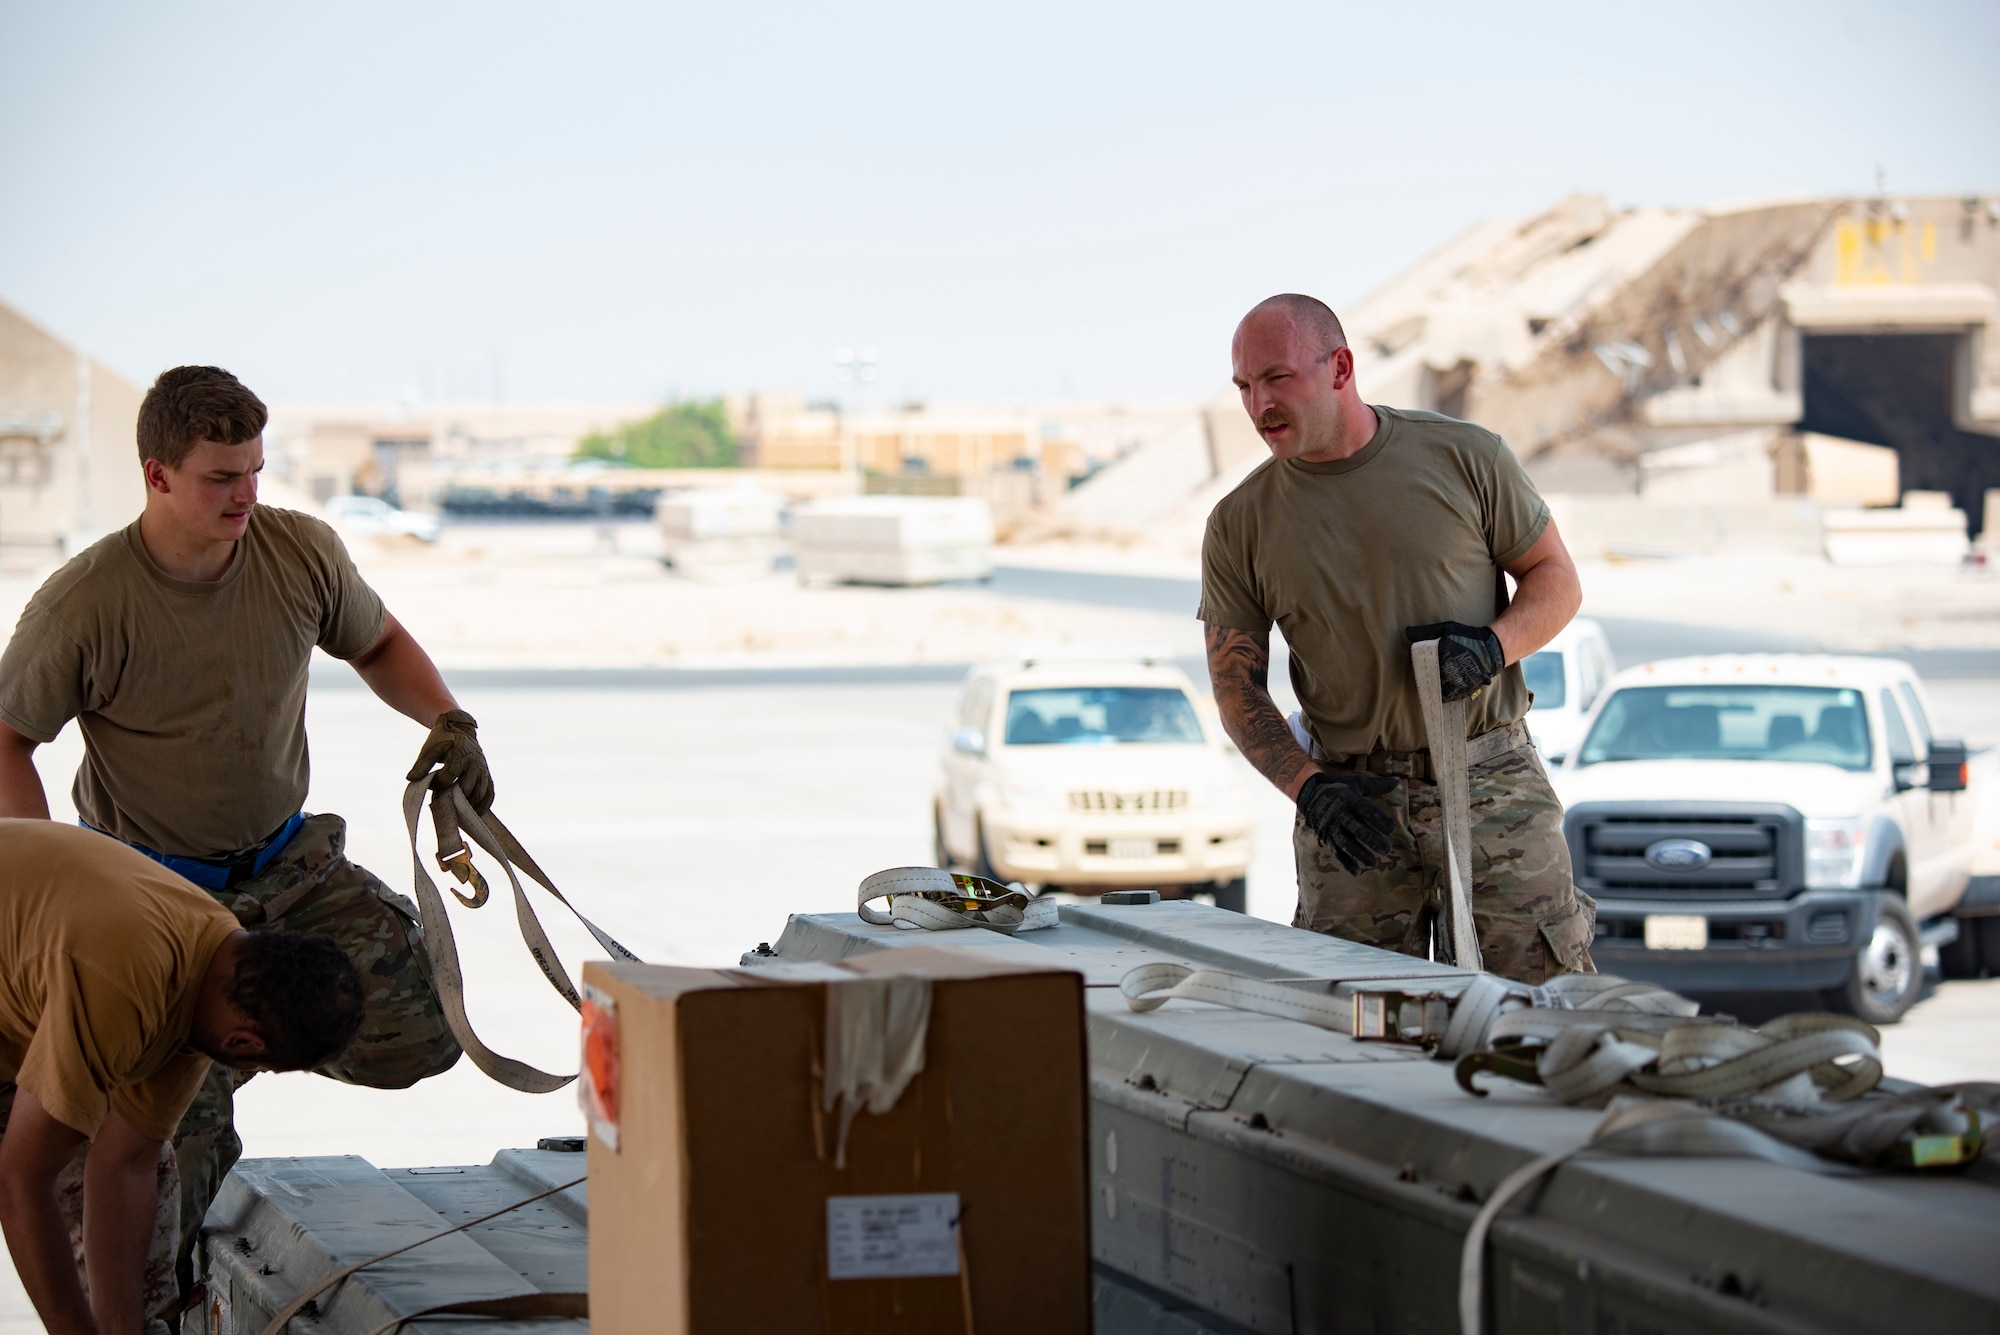 U.S. Air Force Senior Airman Colby Lash, (left) a ramp specialist assigned to the 386th Expeditionary Logistics Readiness Squadron and deployed from Joint Base McGuire-Dix-Lakehurst, New Jersey, and Senior Airman William Ford, (right) an aerial port expediter assigned the 386th Expeditionary Logistics Readiness Squadron and deployed from Travis AFB, California, prepare to load a case onto a Kuwait Air Force C-17 Globemaster III at Ali Al Salem Air Base, Kuwait, July 26, 2021. One of the priorities of the 386th Air Expeditionary Wing is to foster enduring partnerships. These partnerships are built on mutual respect and critical to current and future missions. (U.S. Air Force Senior Airman Helena Owens)